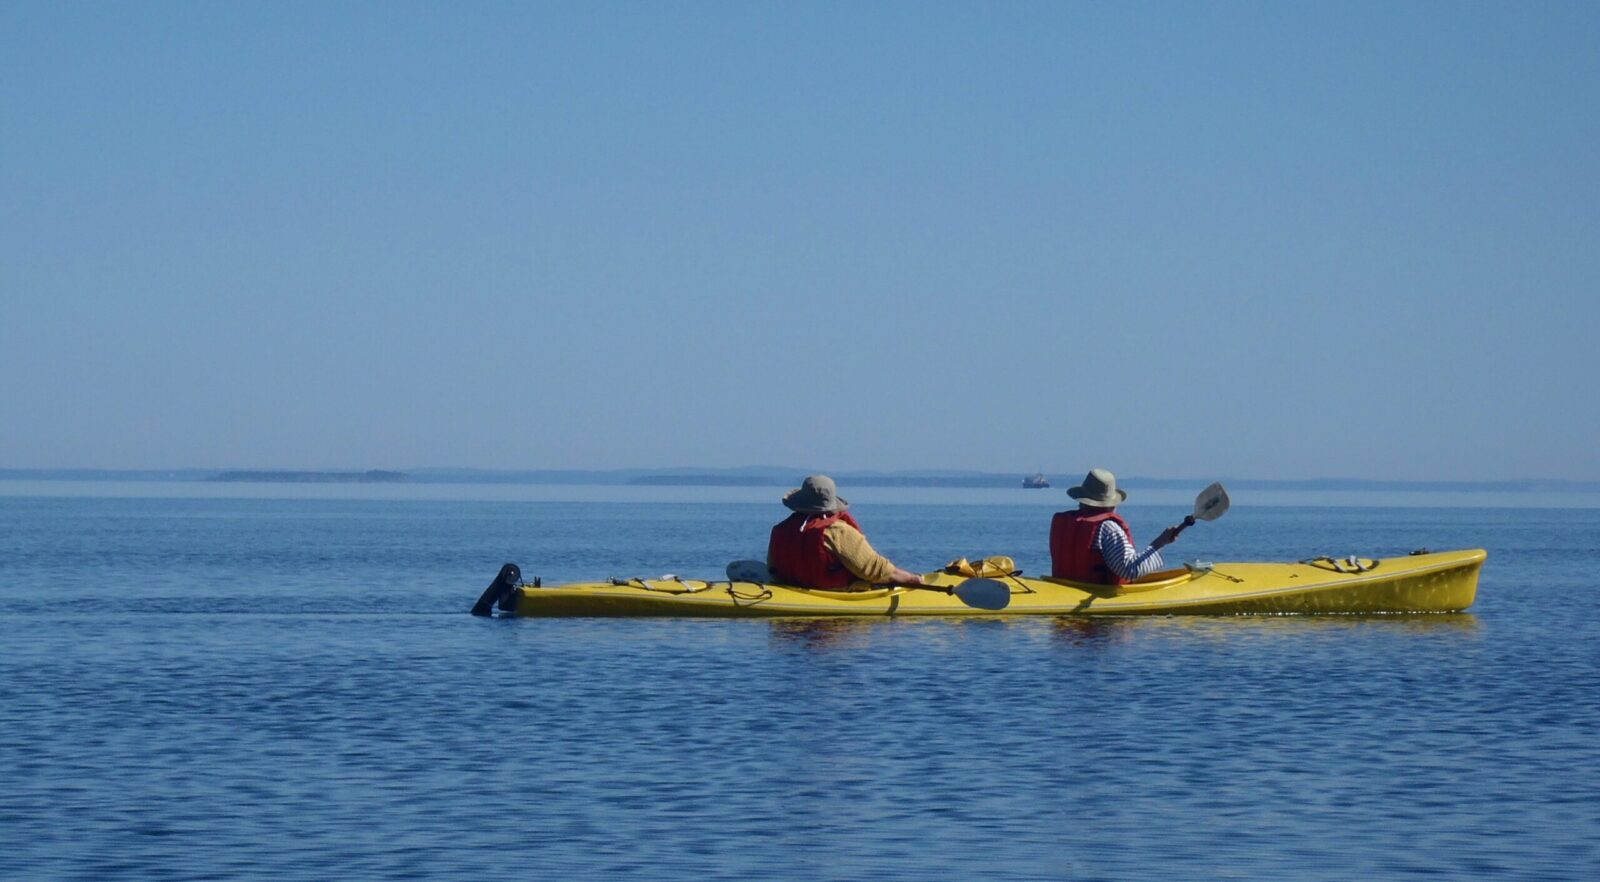 Two people in a yellow kayak on the water.